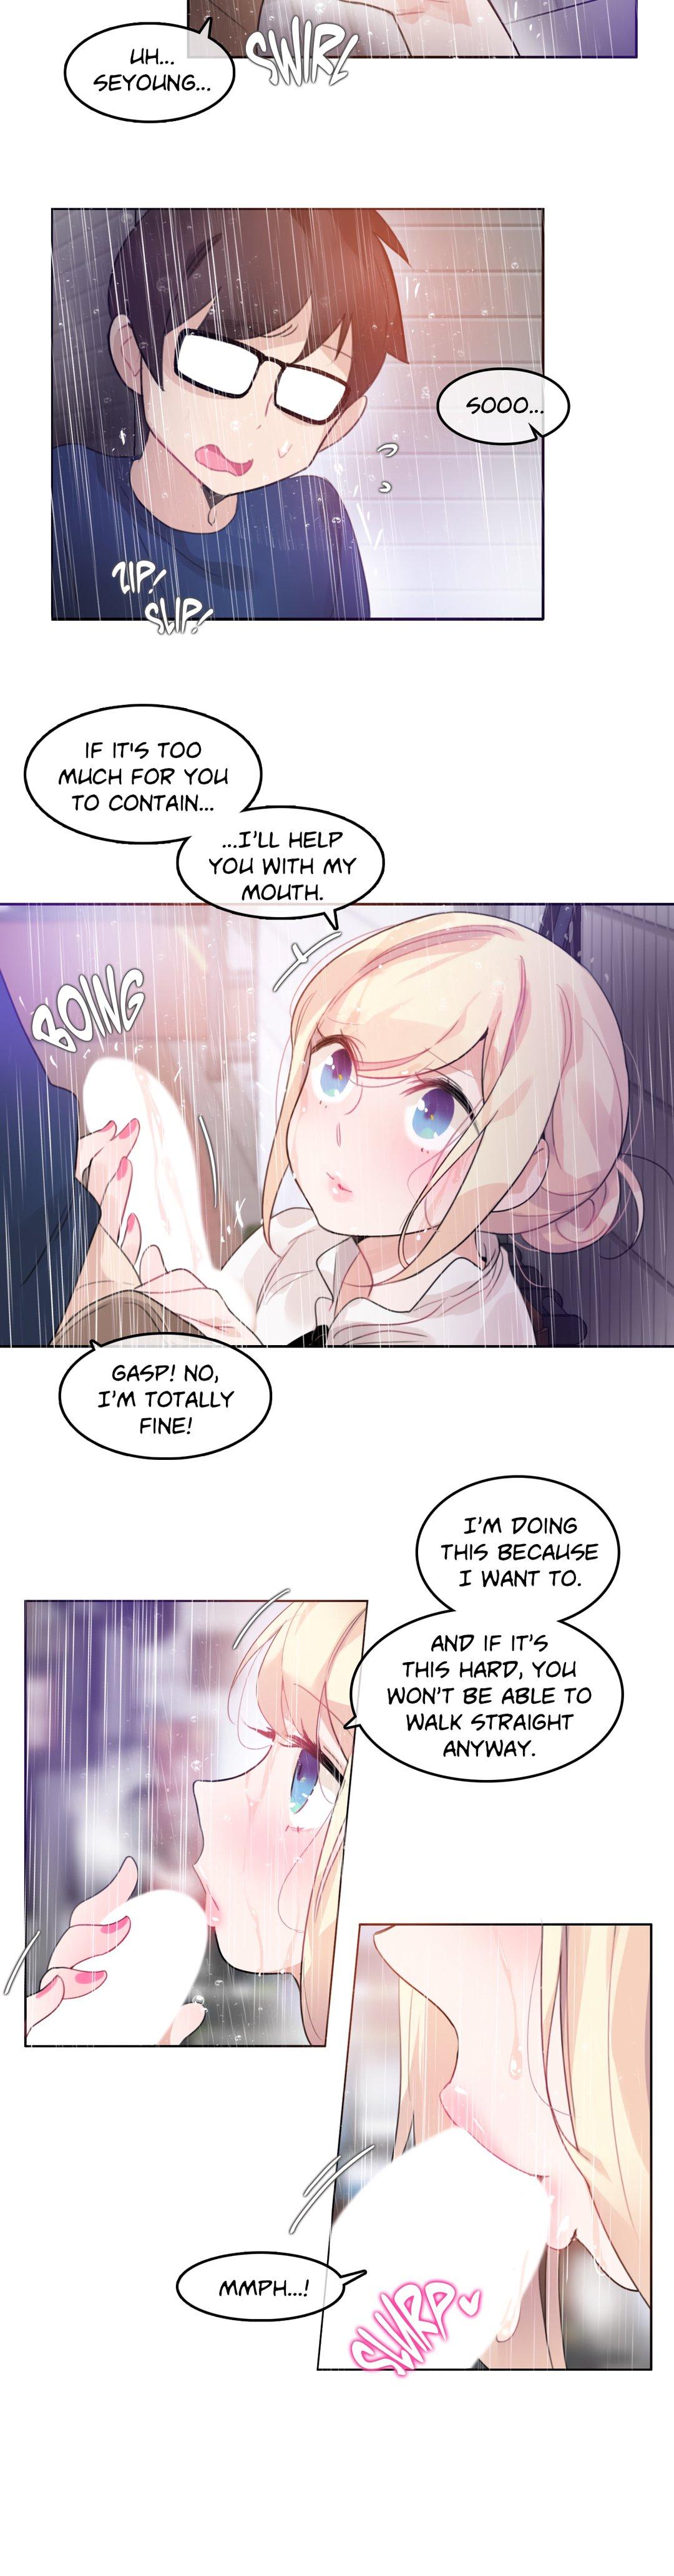 A Pervert's Daily Life • Chapter 36-40 17